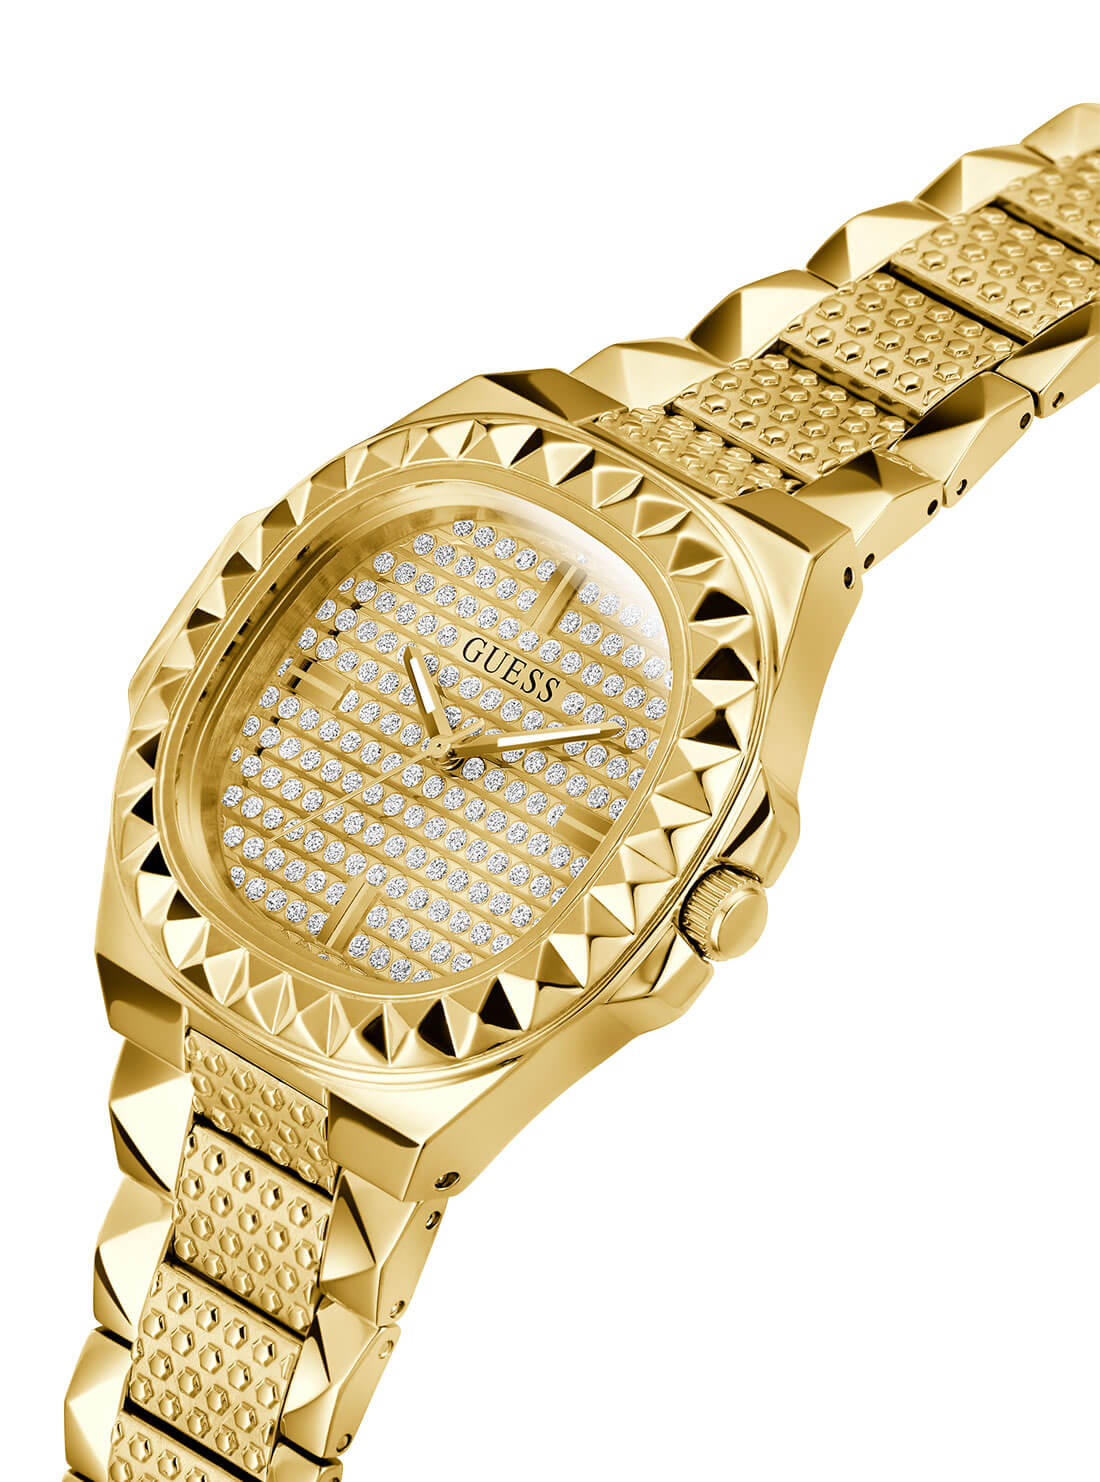 Gold Rebel Crystal Watch | GUESS Men's watches | detail view